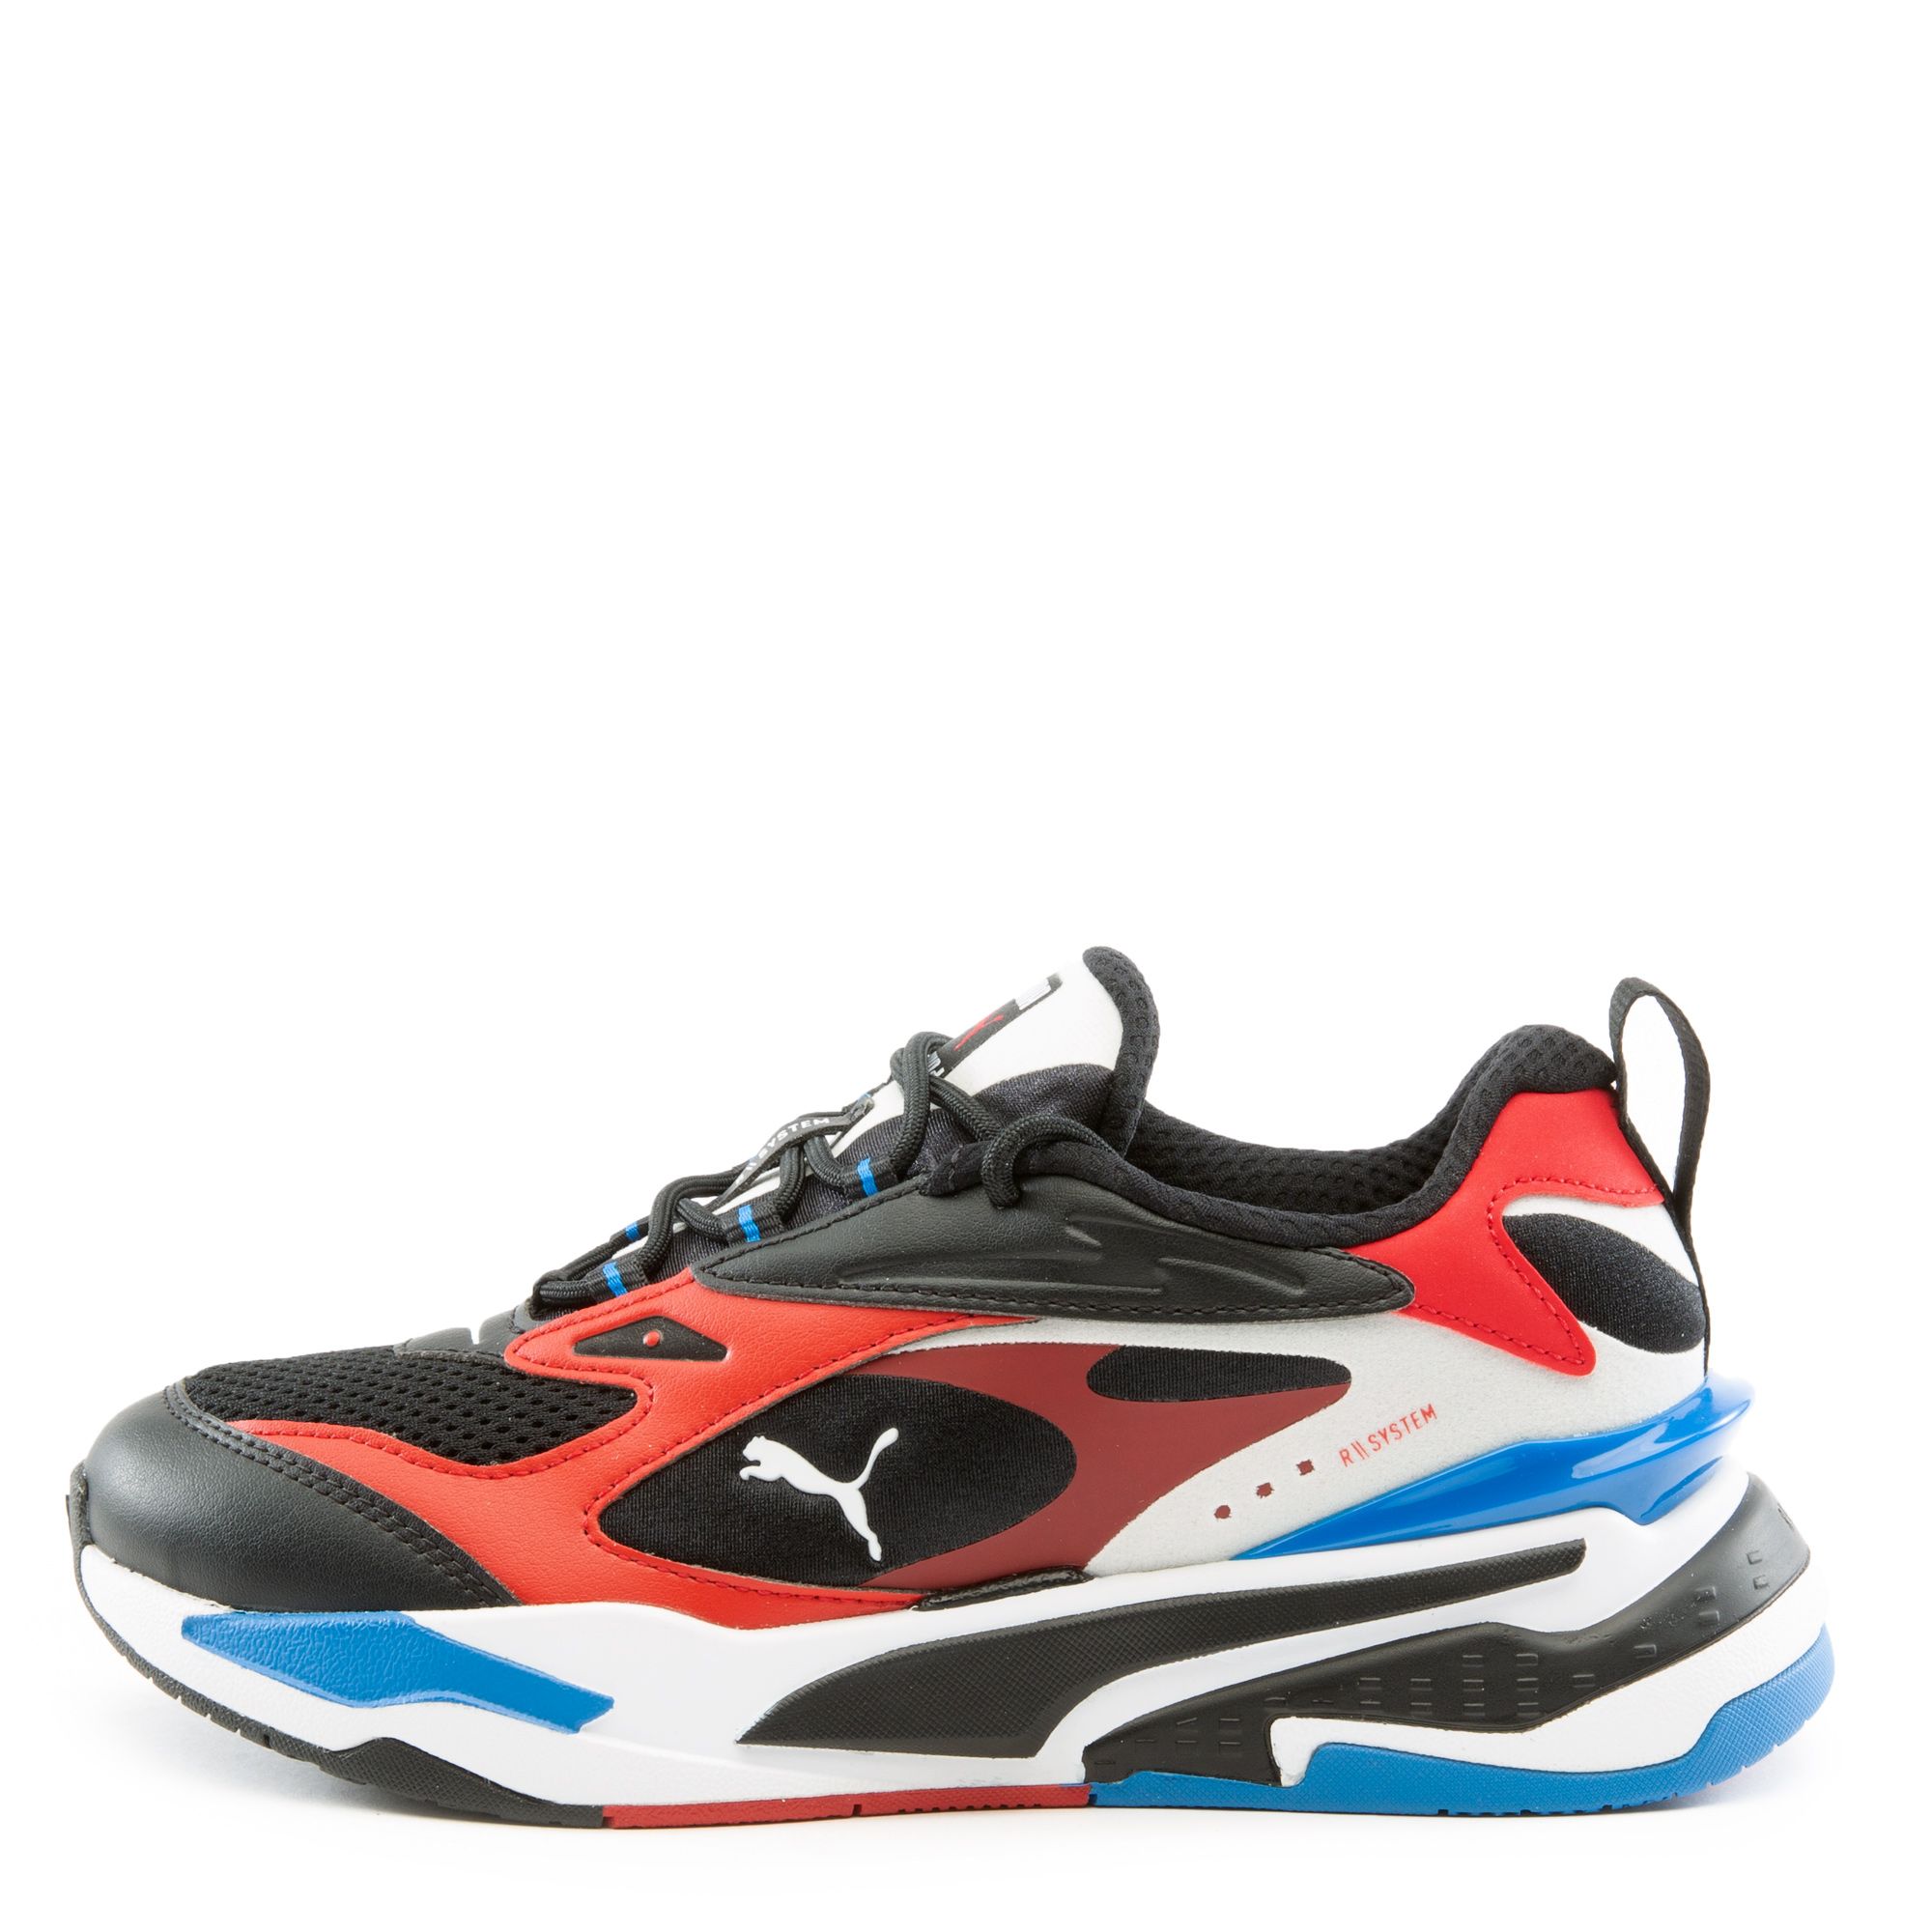 Puma Shoes Black And Red